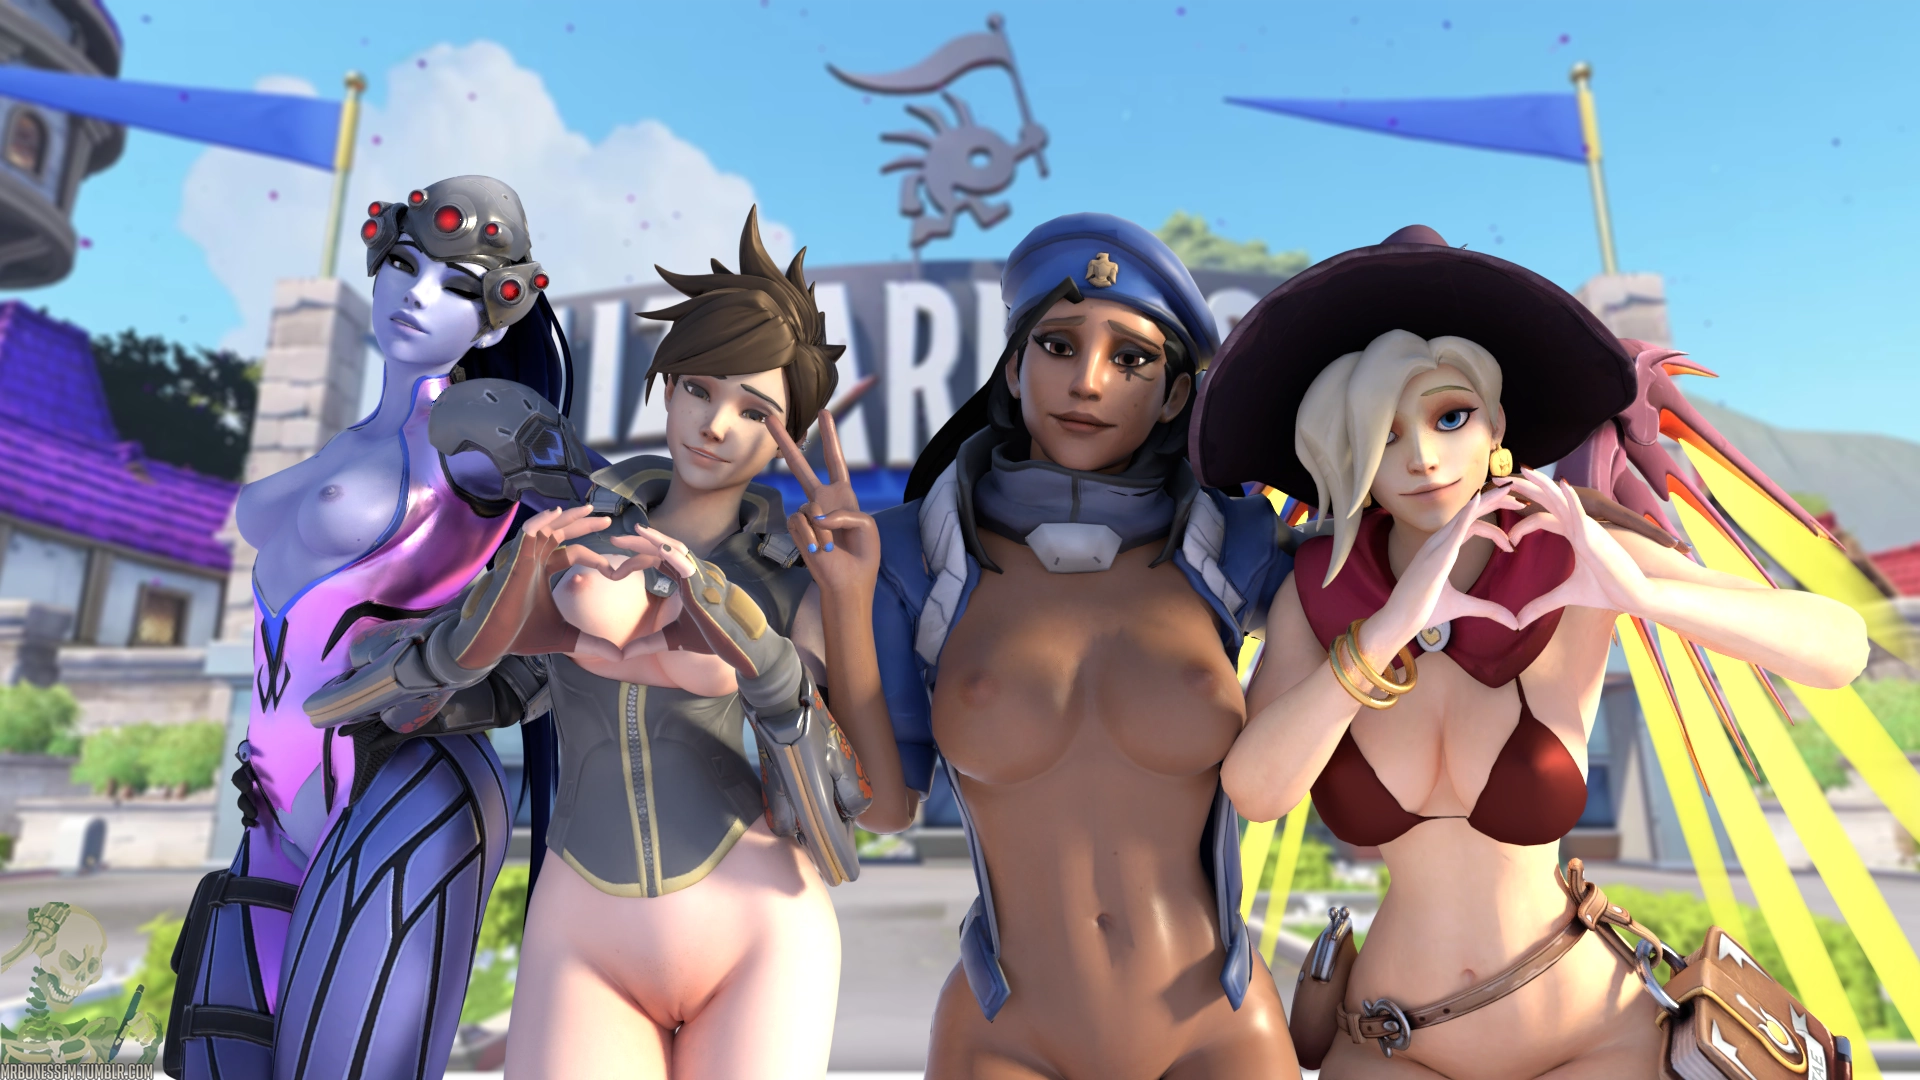 Ana, Mercy, Tracer and Widowmaker